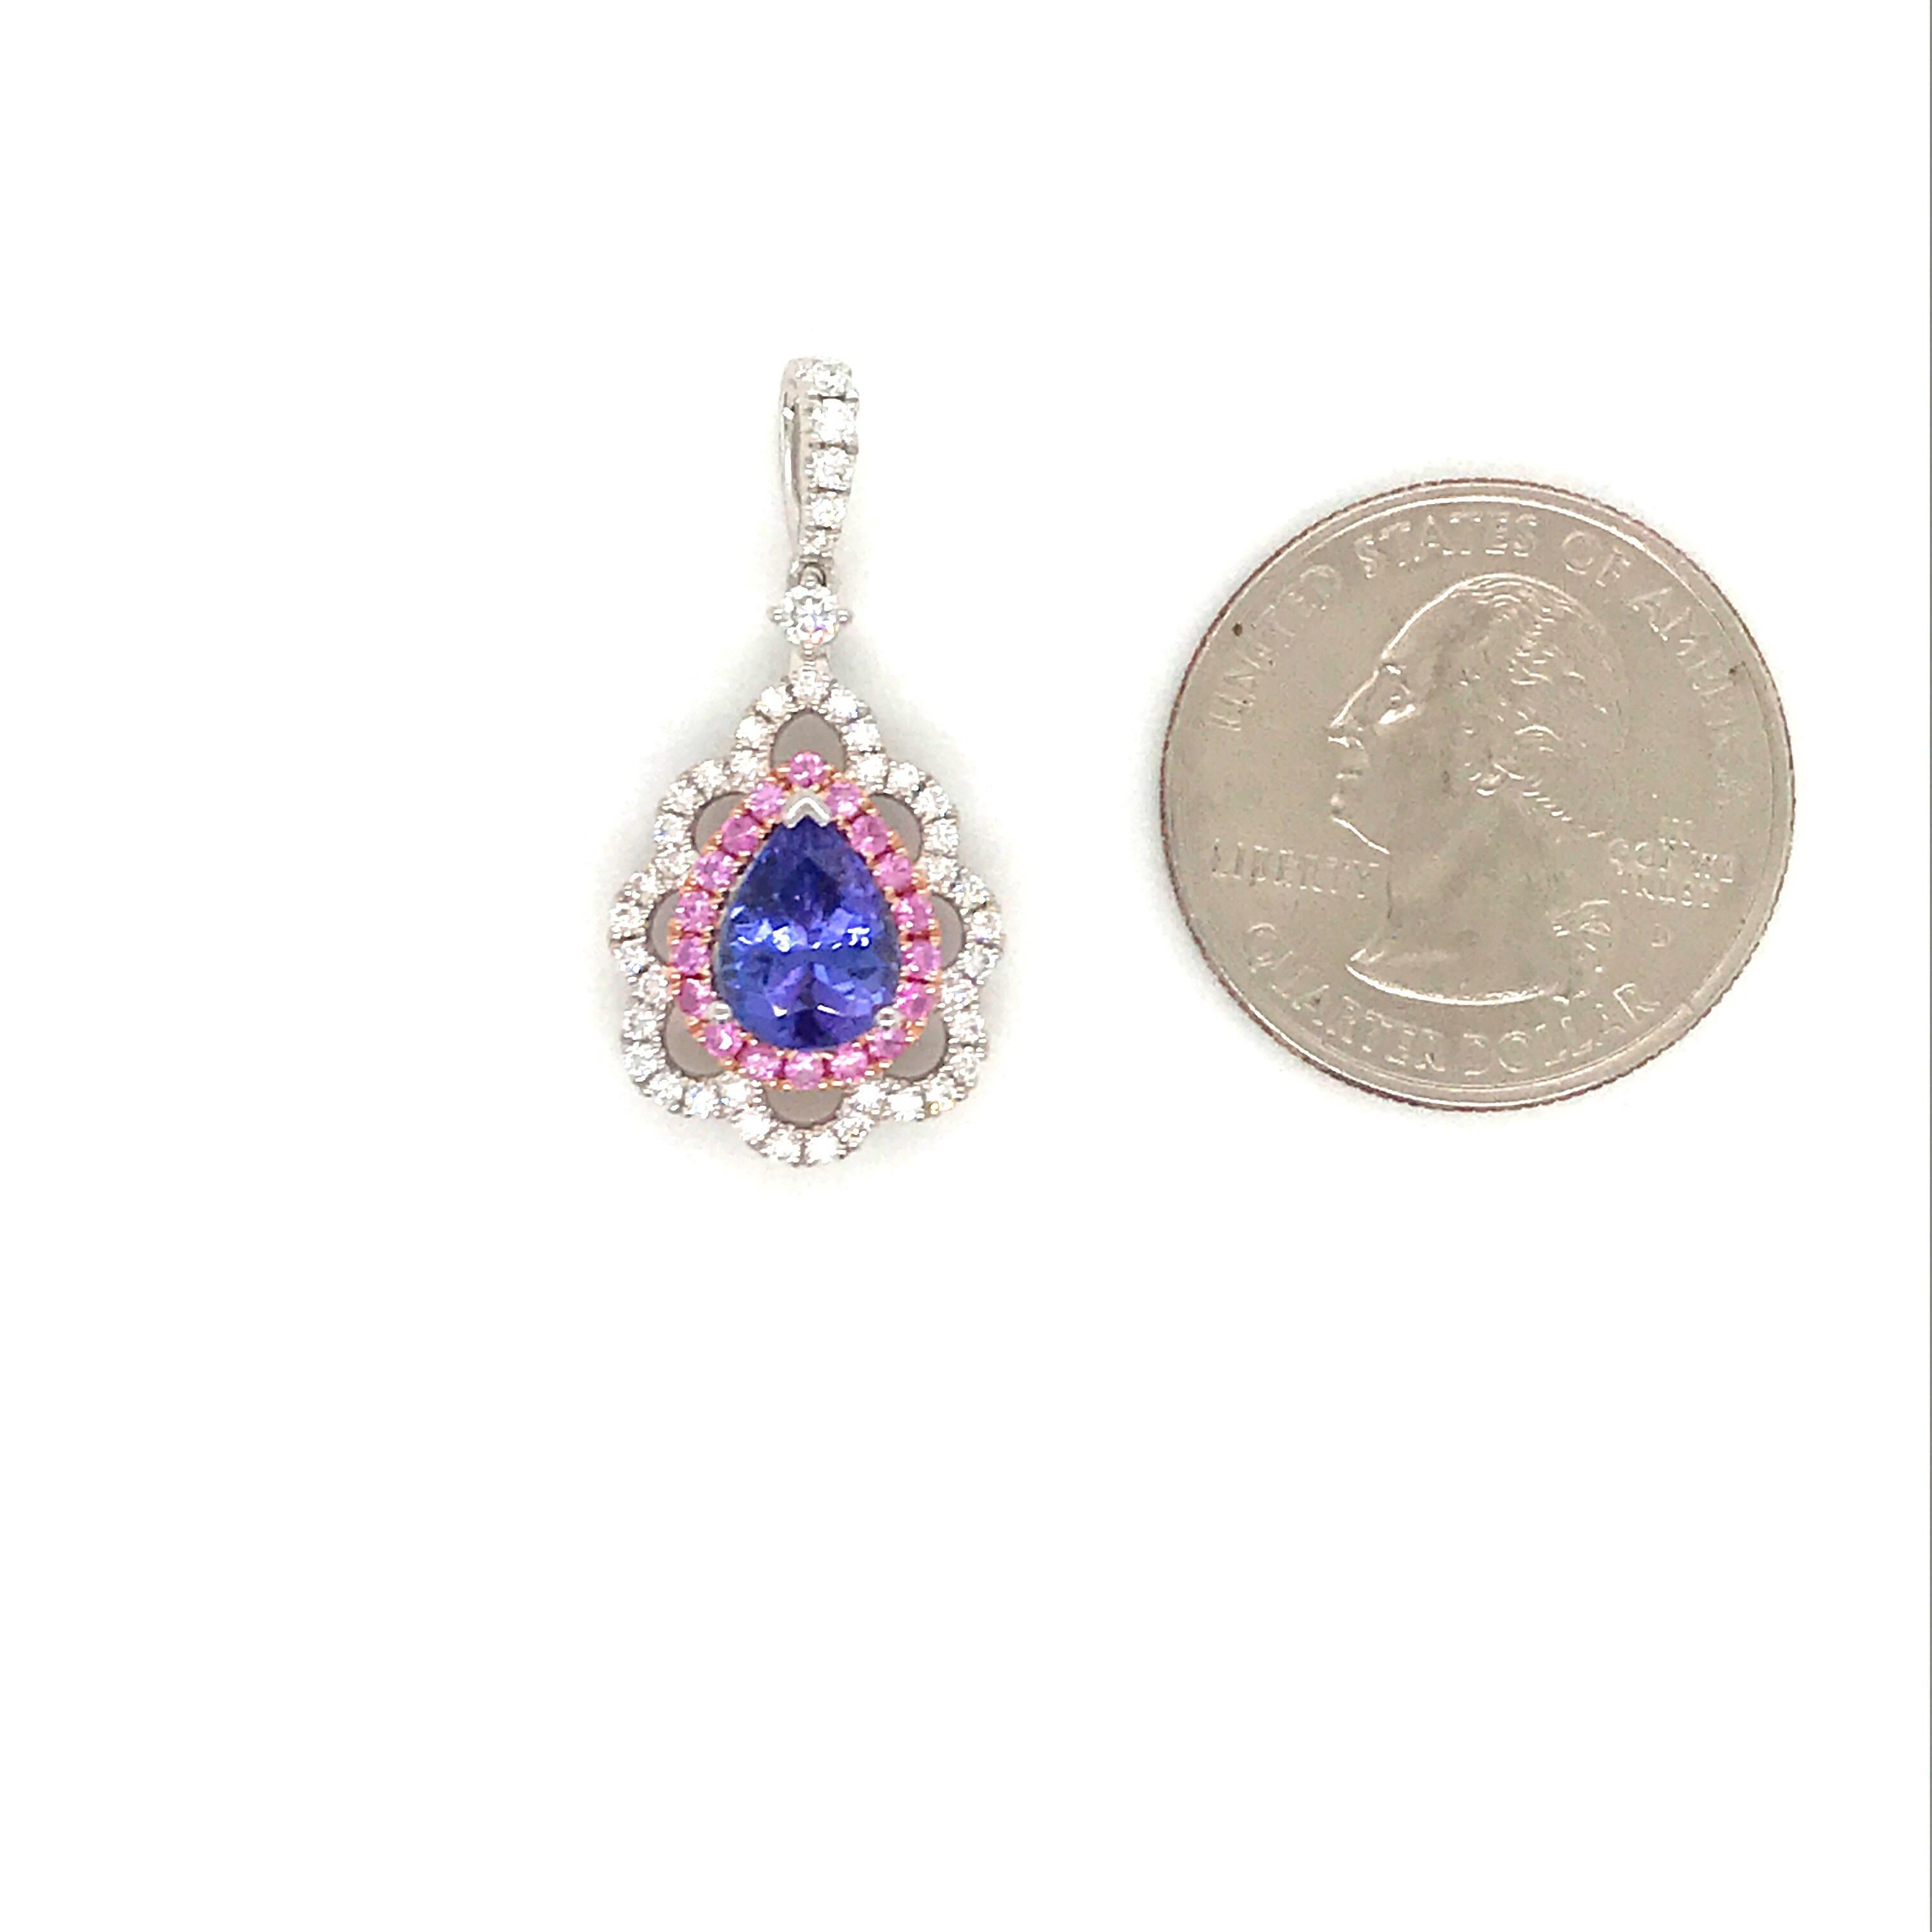 18K White gold pendant featuring one pear shape tanzanite weighing 1.88 carats flanked with pink sapphires, 0.30 carats and round brilliance 0.43 carats. Comes with 14k white gold chain. 
Color G
Clarity SI